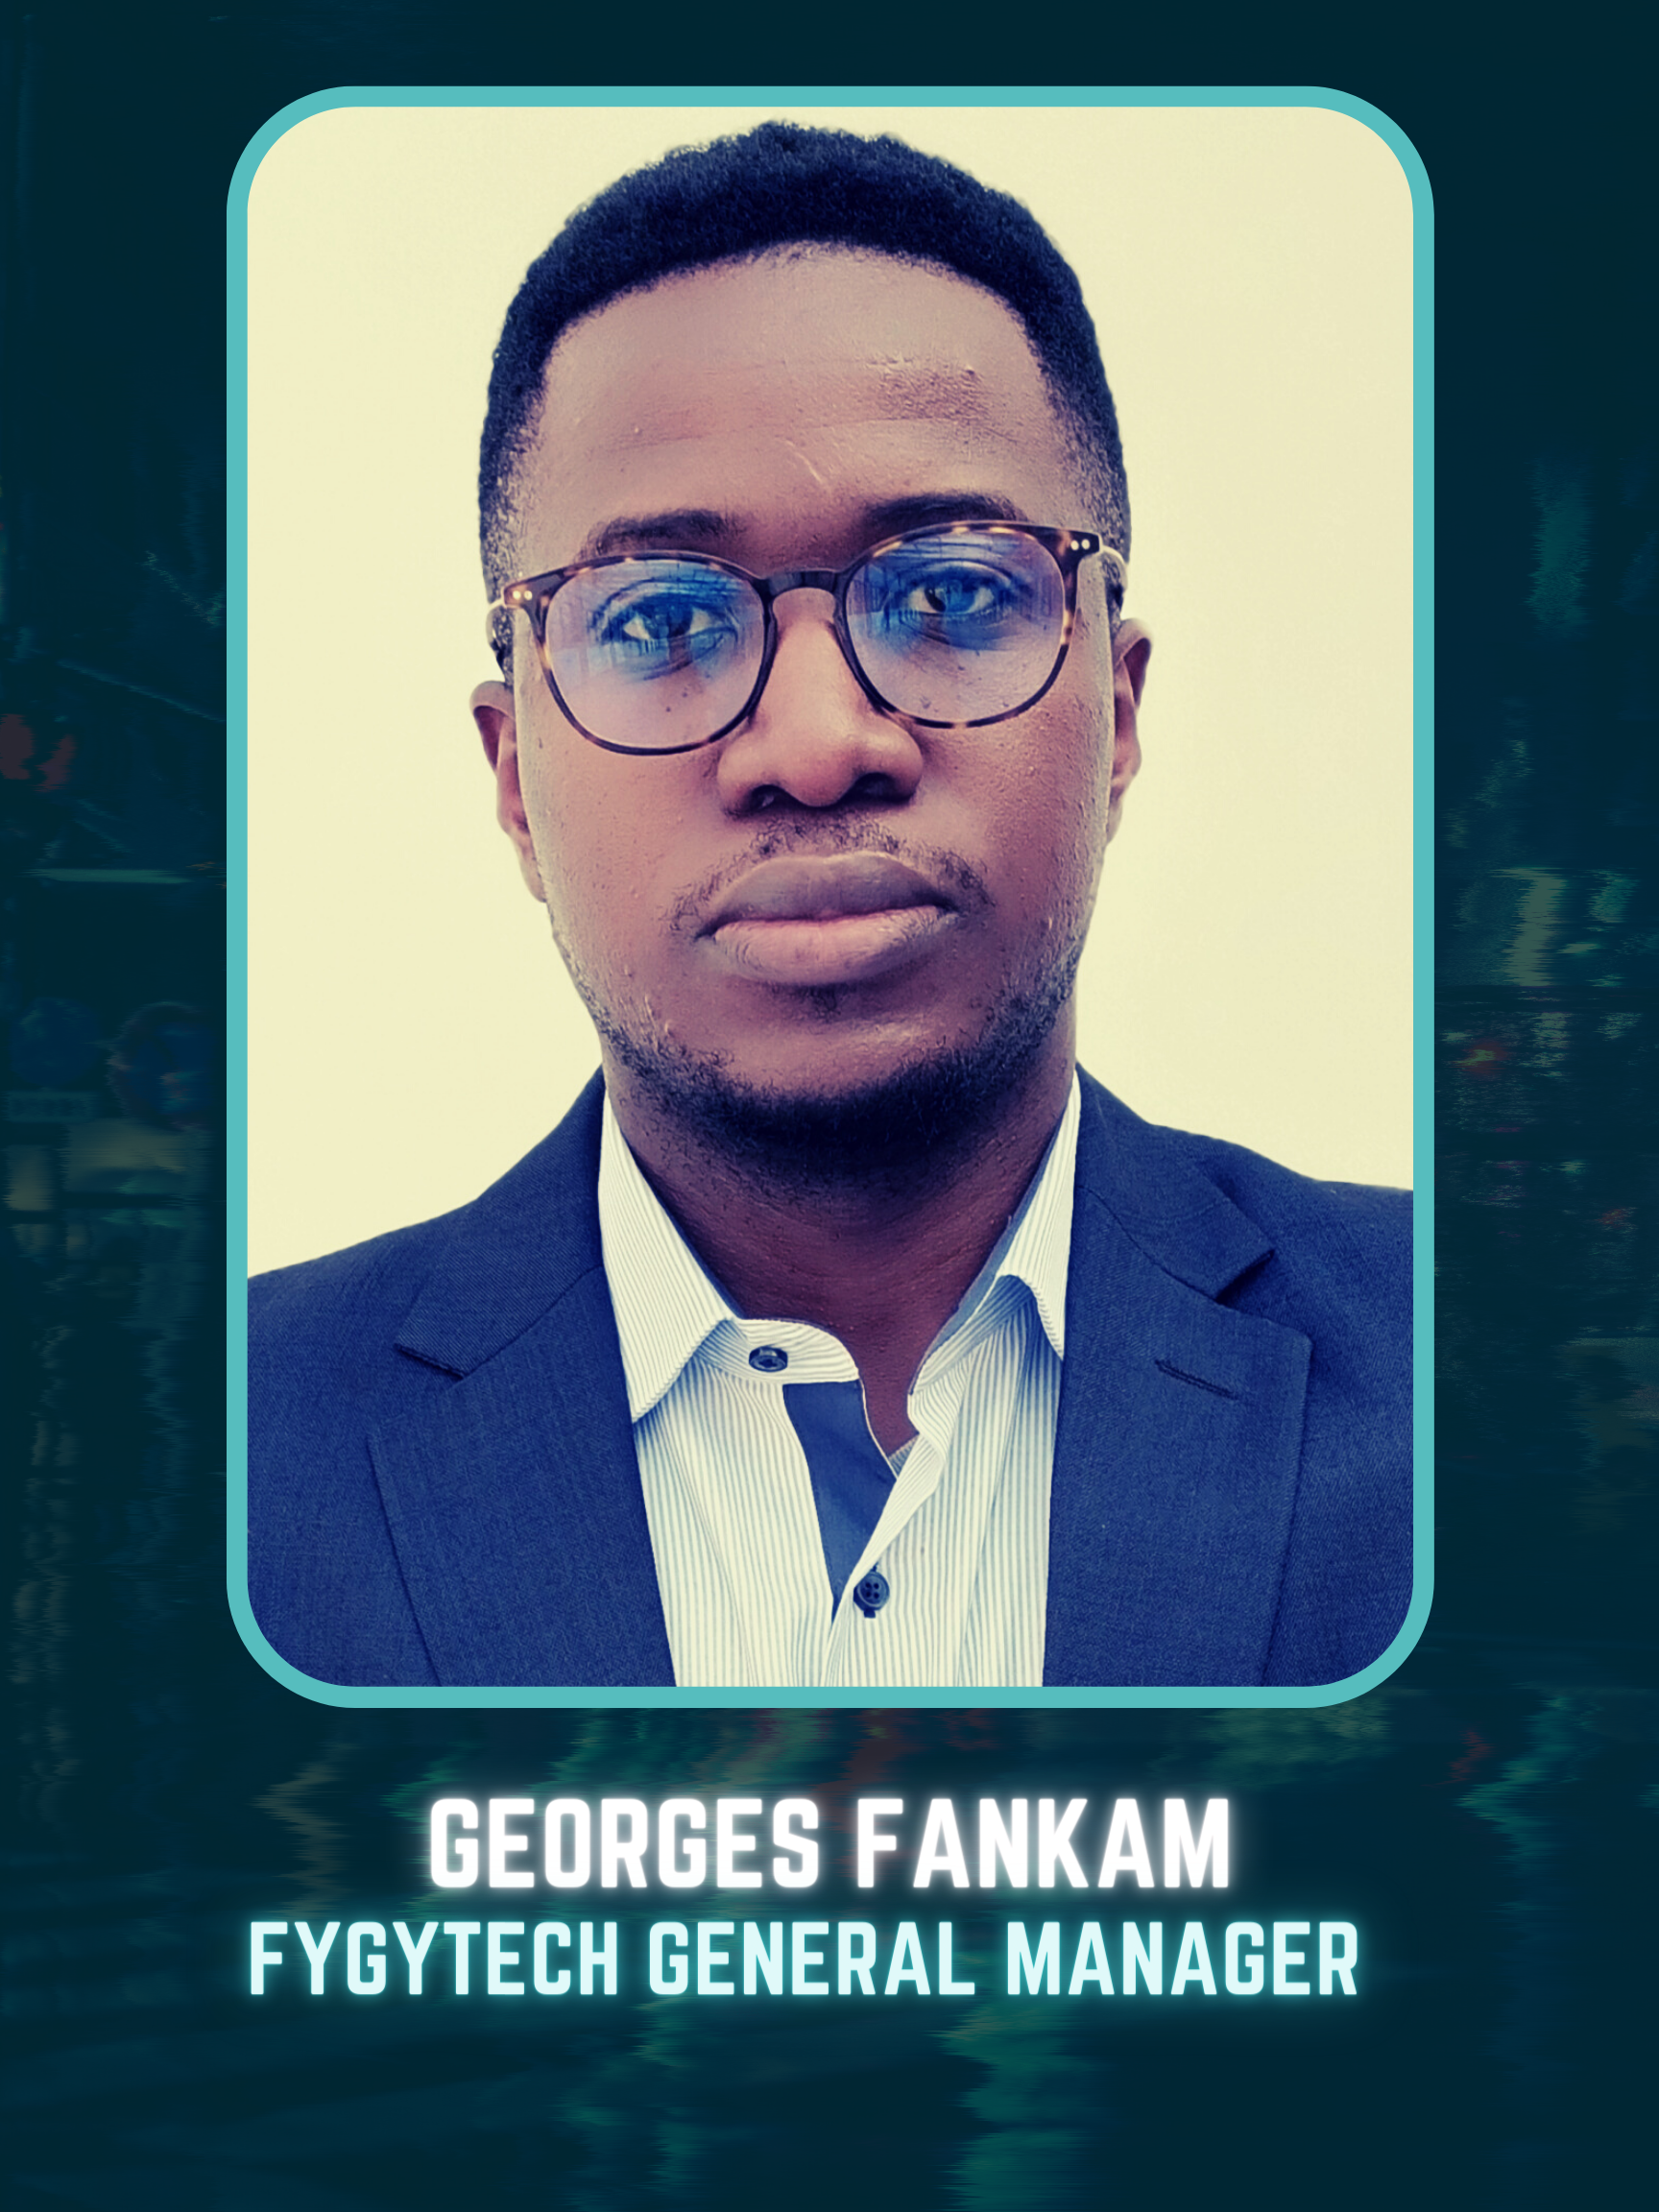 Georges Fankam